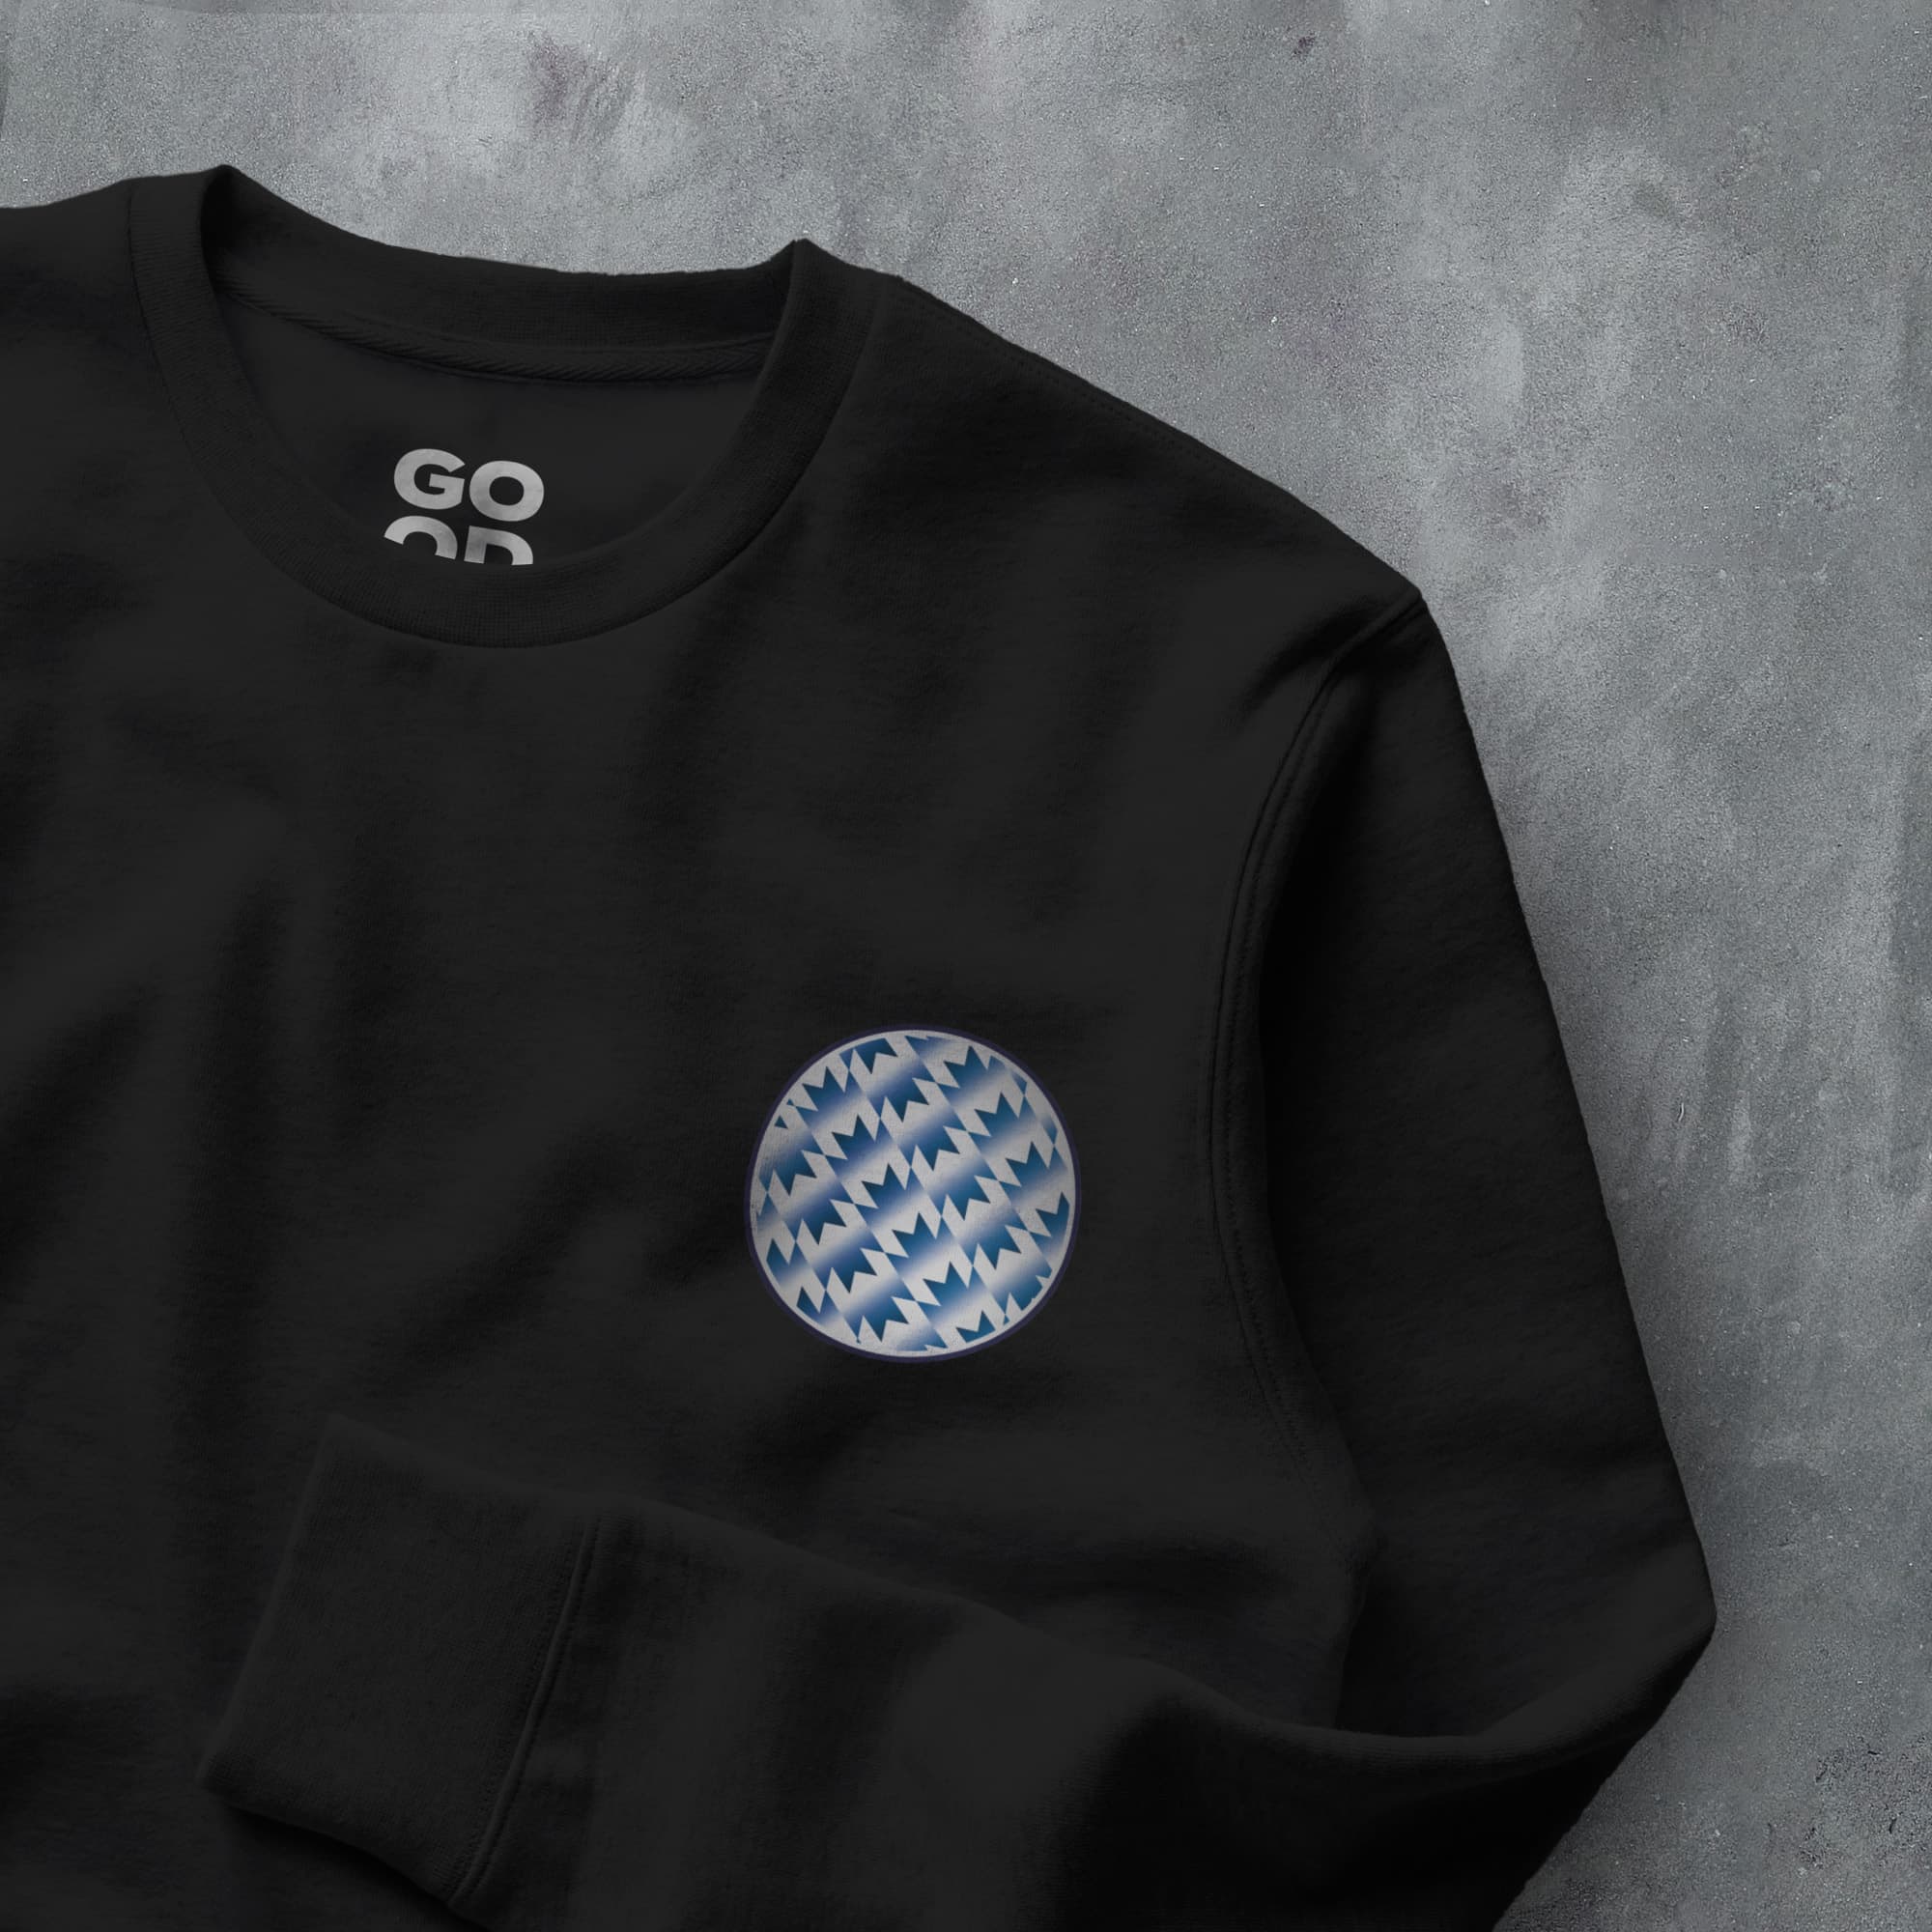 a black sweatshirt with a blue and white pattern on it